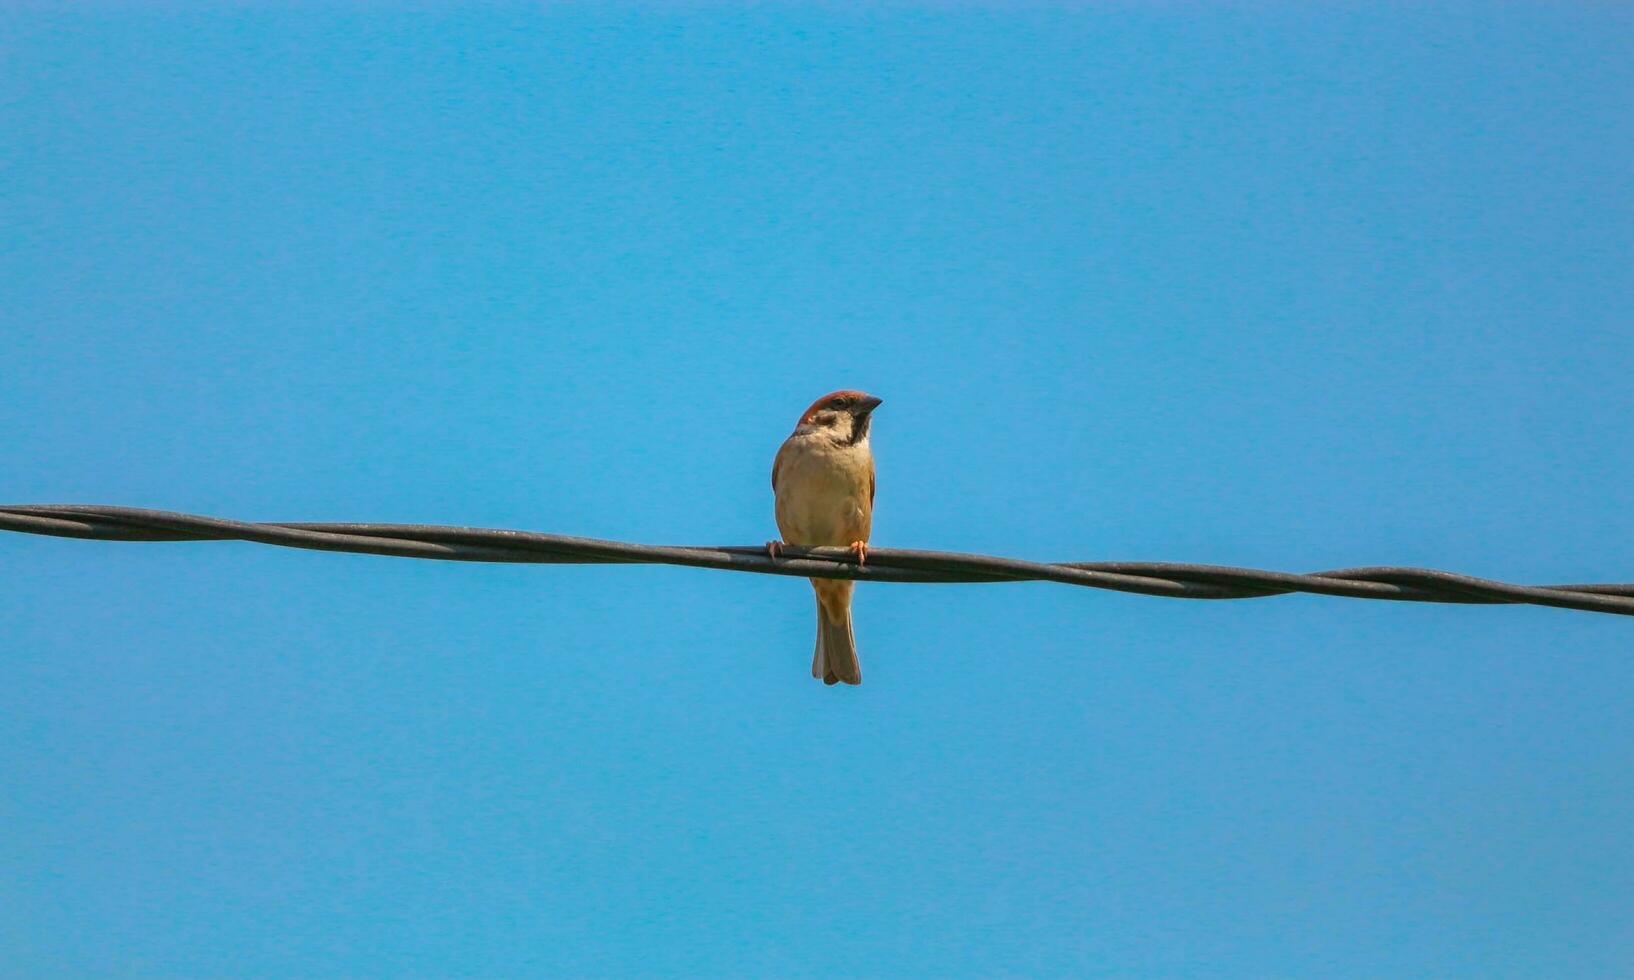 A sparrow is perched on an electric cable against the blue sky photo